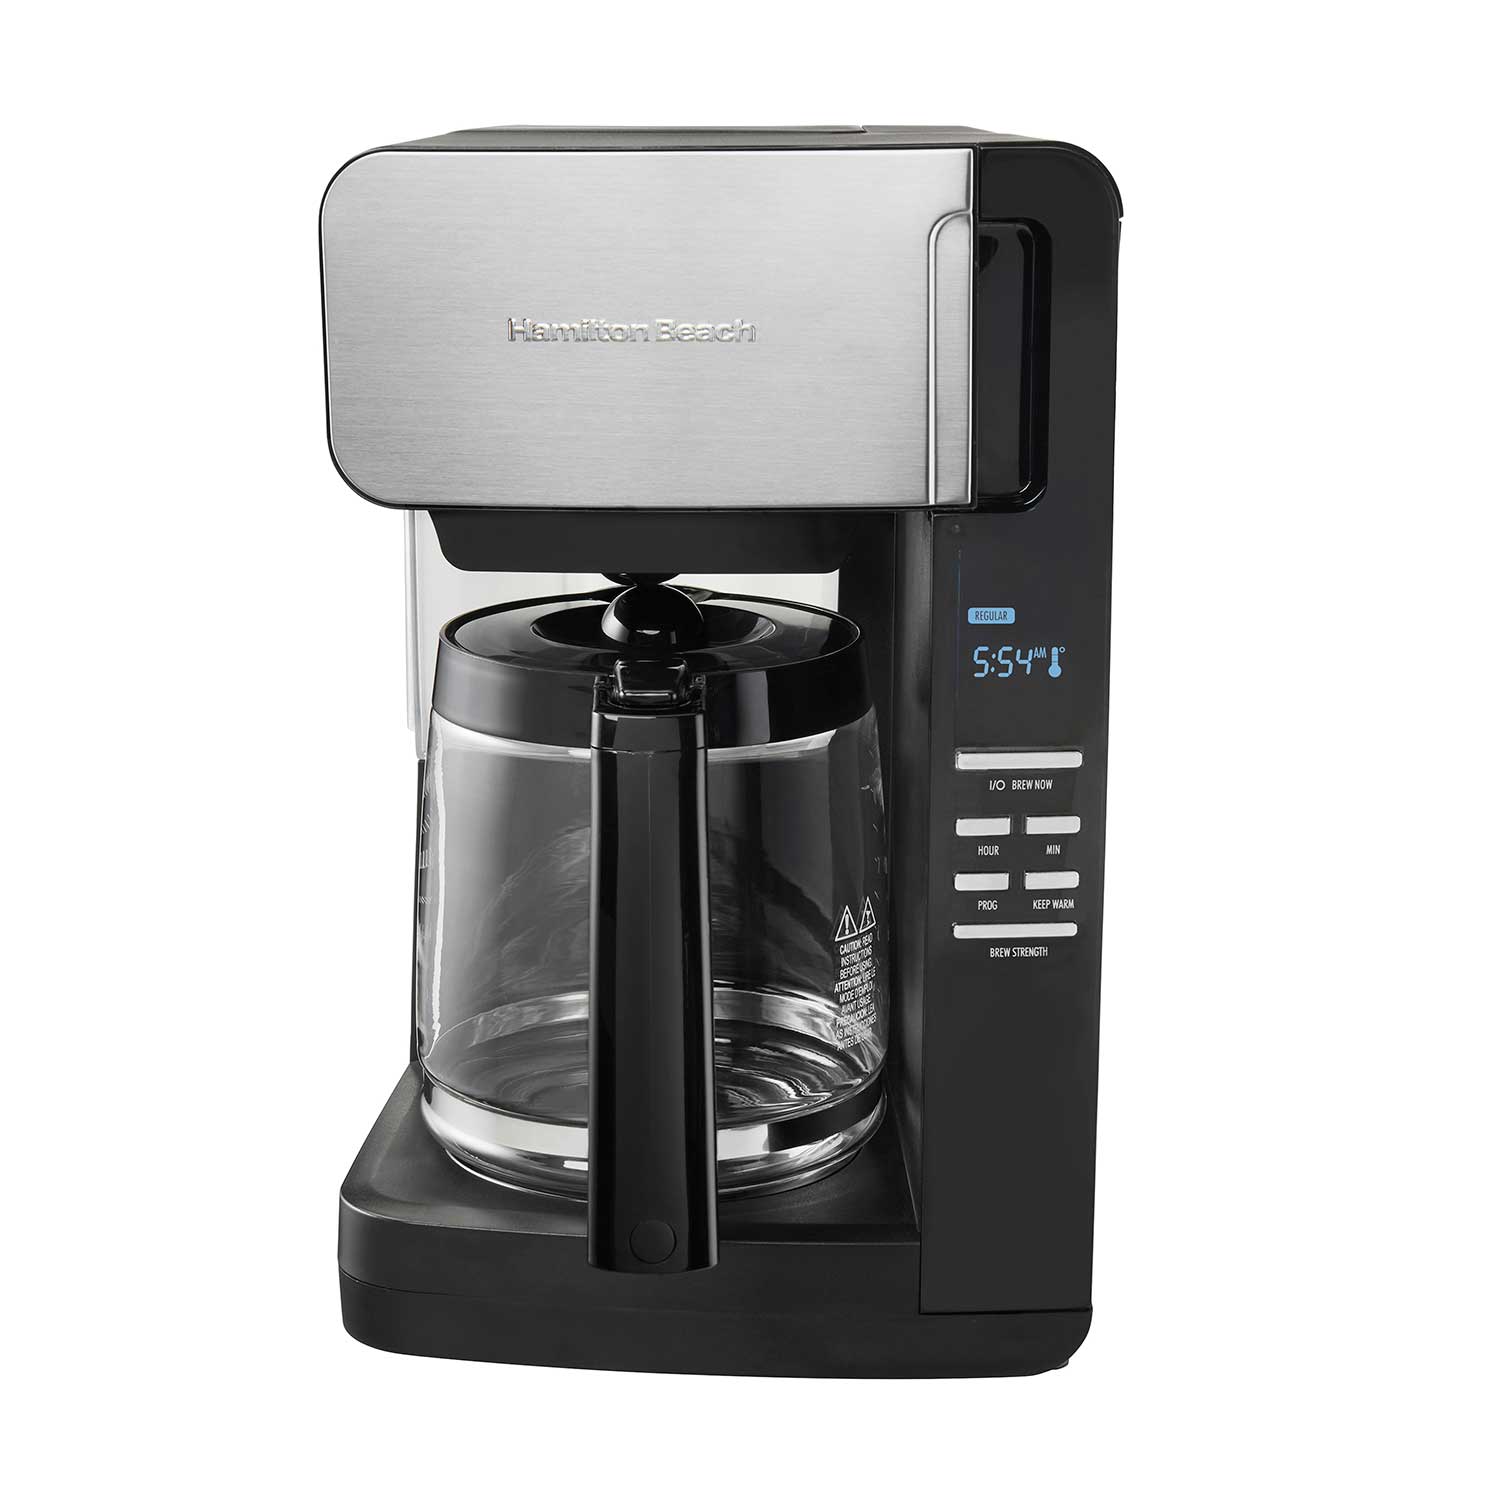 Hamilton Beach 12-Cup Programmable Ultra Coffee Maker with